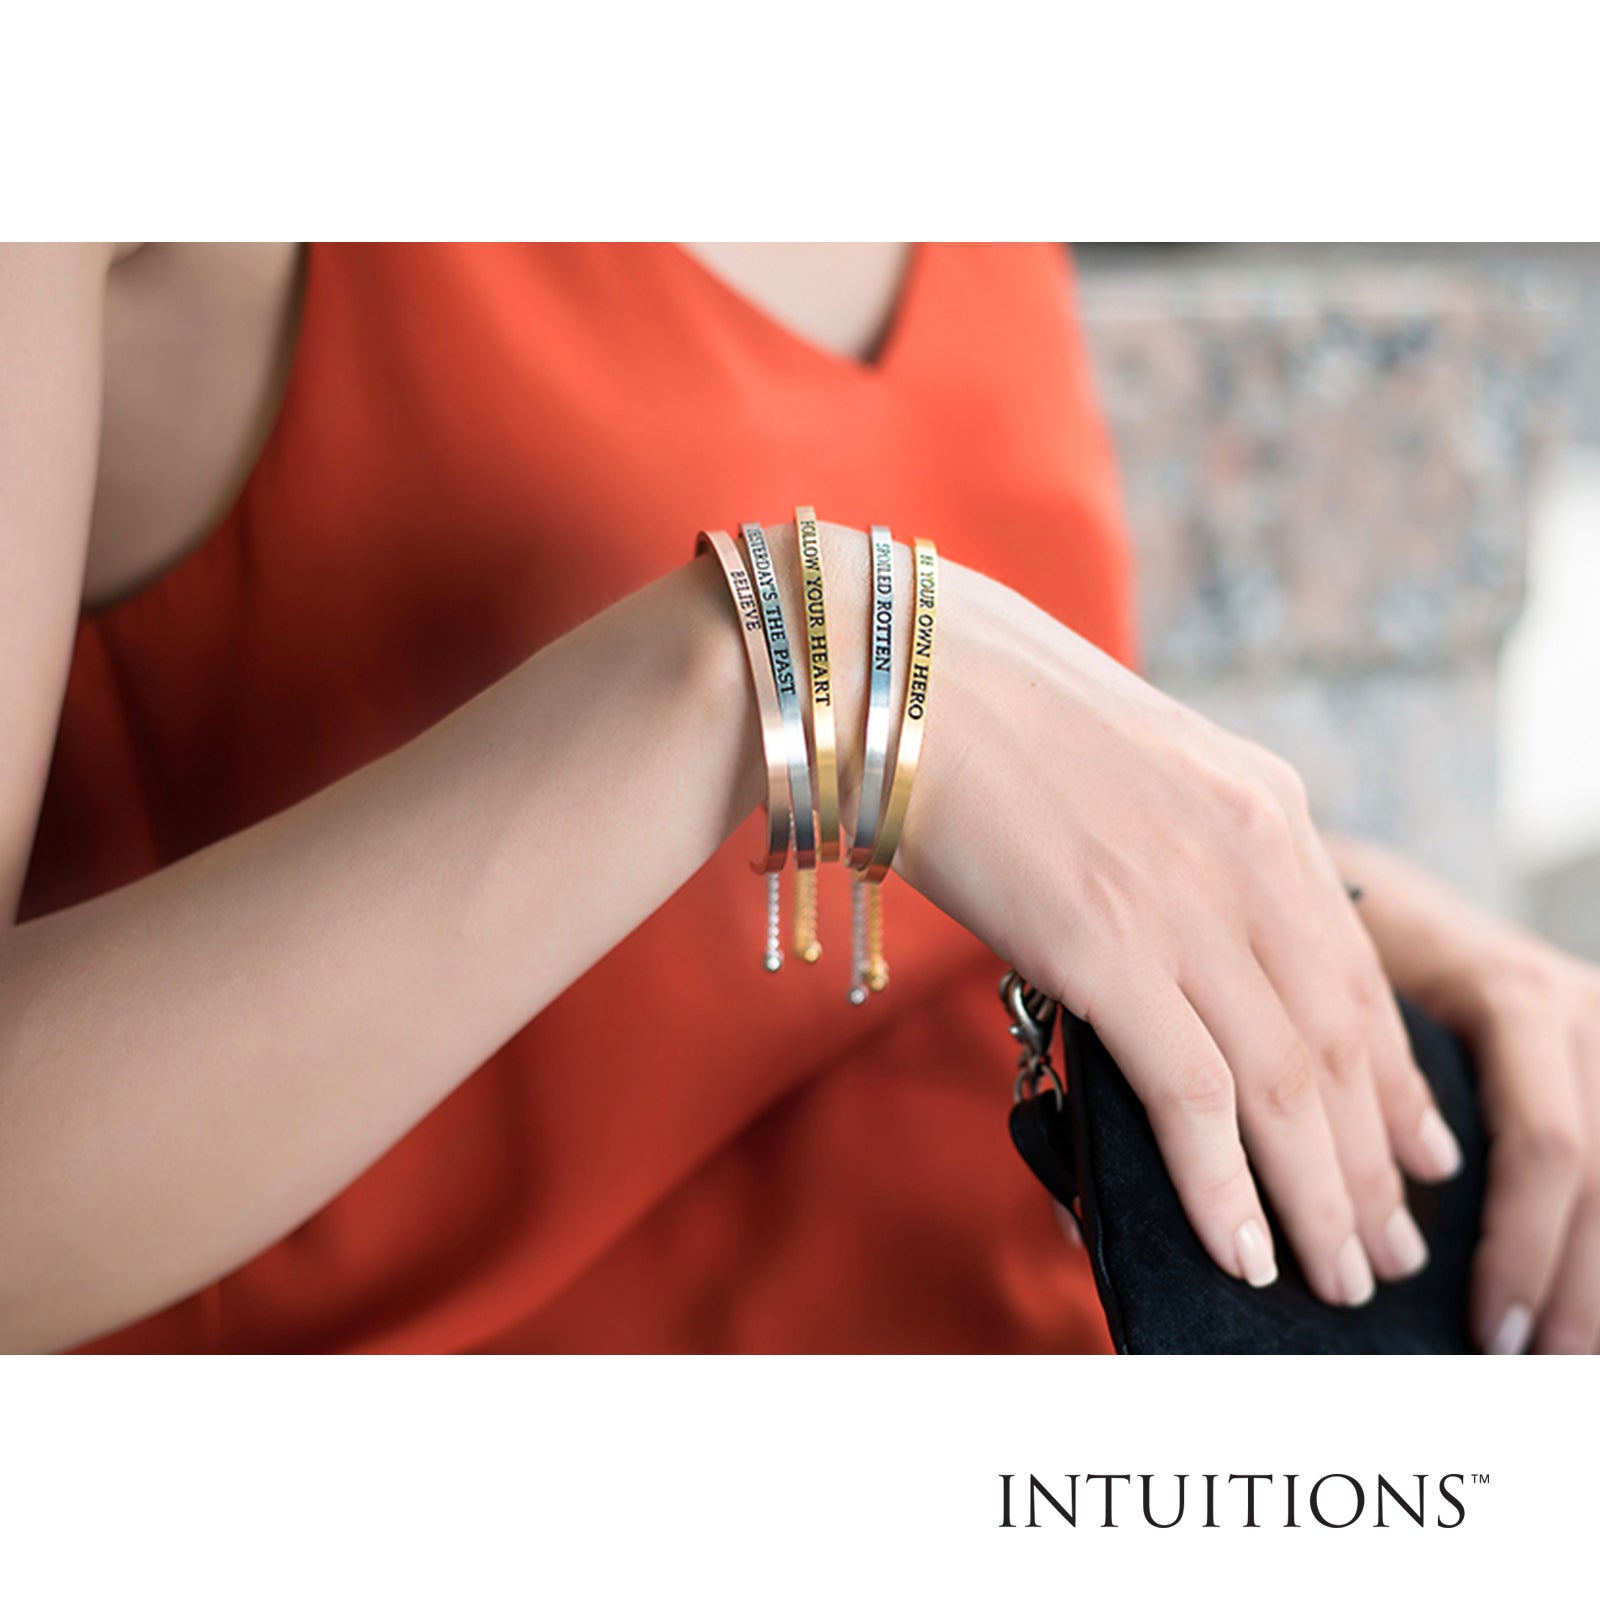 Intuitions Stainless Steel Satin Square Faith With Cross Bangle Bracelet